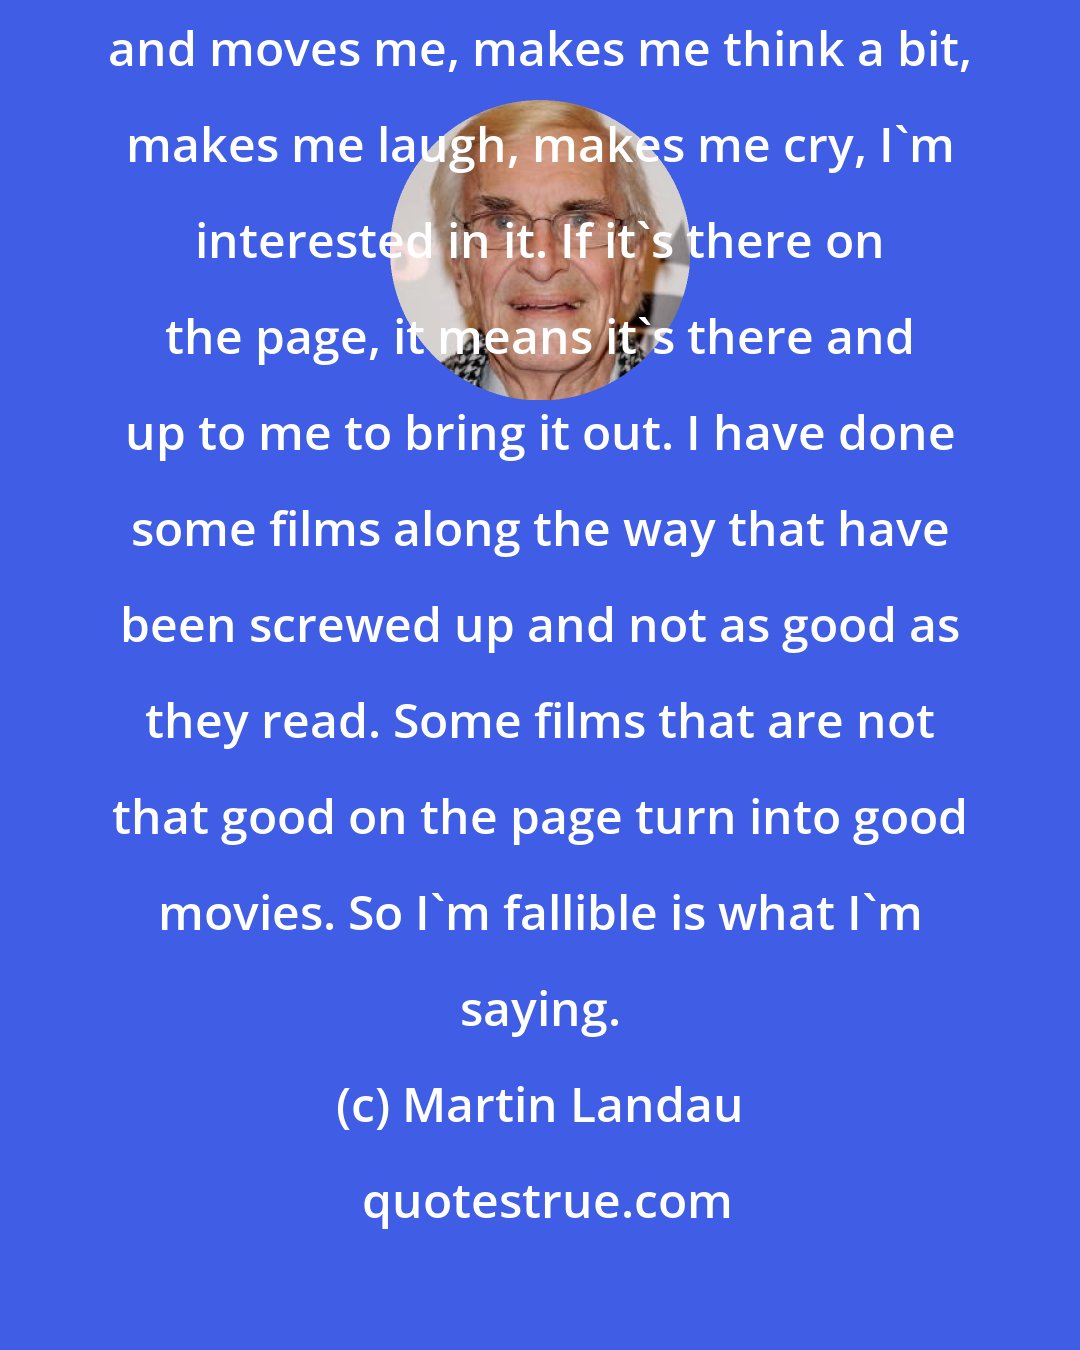 Martin Landau: If it bothers me on the page, I don't do it. If it attracts me on the page and moves me, makes me think a bit, makes me laugh, makes me cry, I'm interested in it. If it's there on the page, it means it's there and up to me to bring it out. I have done some films along the way that have been screwed up and not as good as they read. Some films that are not that good on the page turn into good movies. So I'm fallible is what I'm saying.